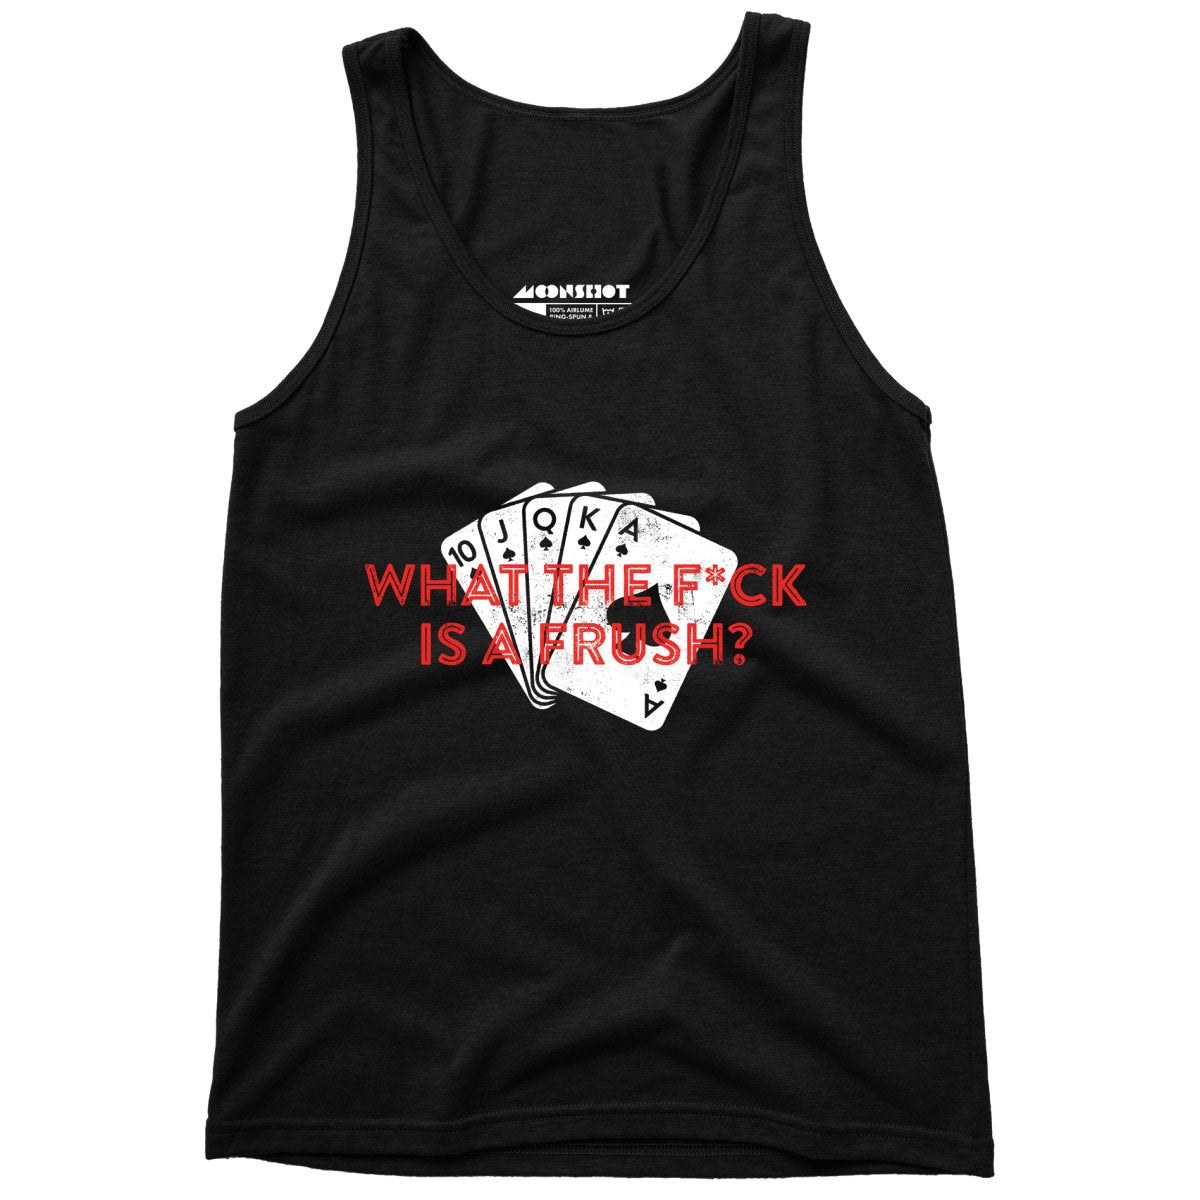 What The F*ck is a Frush? - Unisex Tank Top